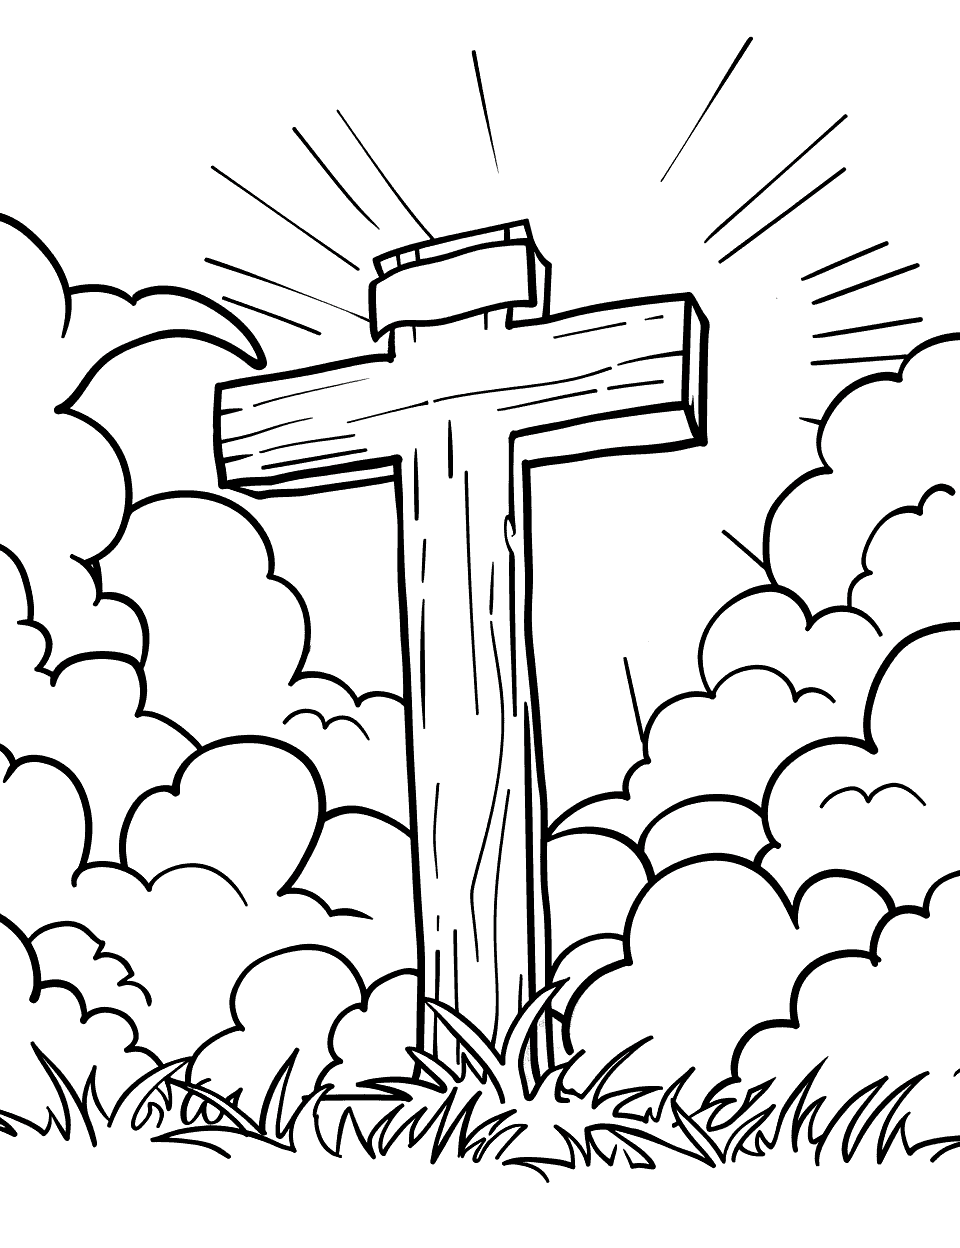 Cross on a Cloudy Sky Coloring Page - A cross standing tall with puffy clouds in the background.